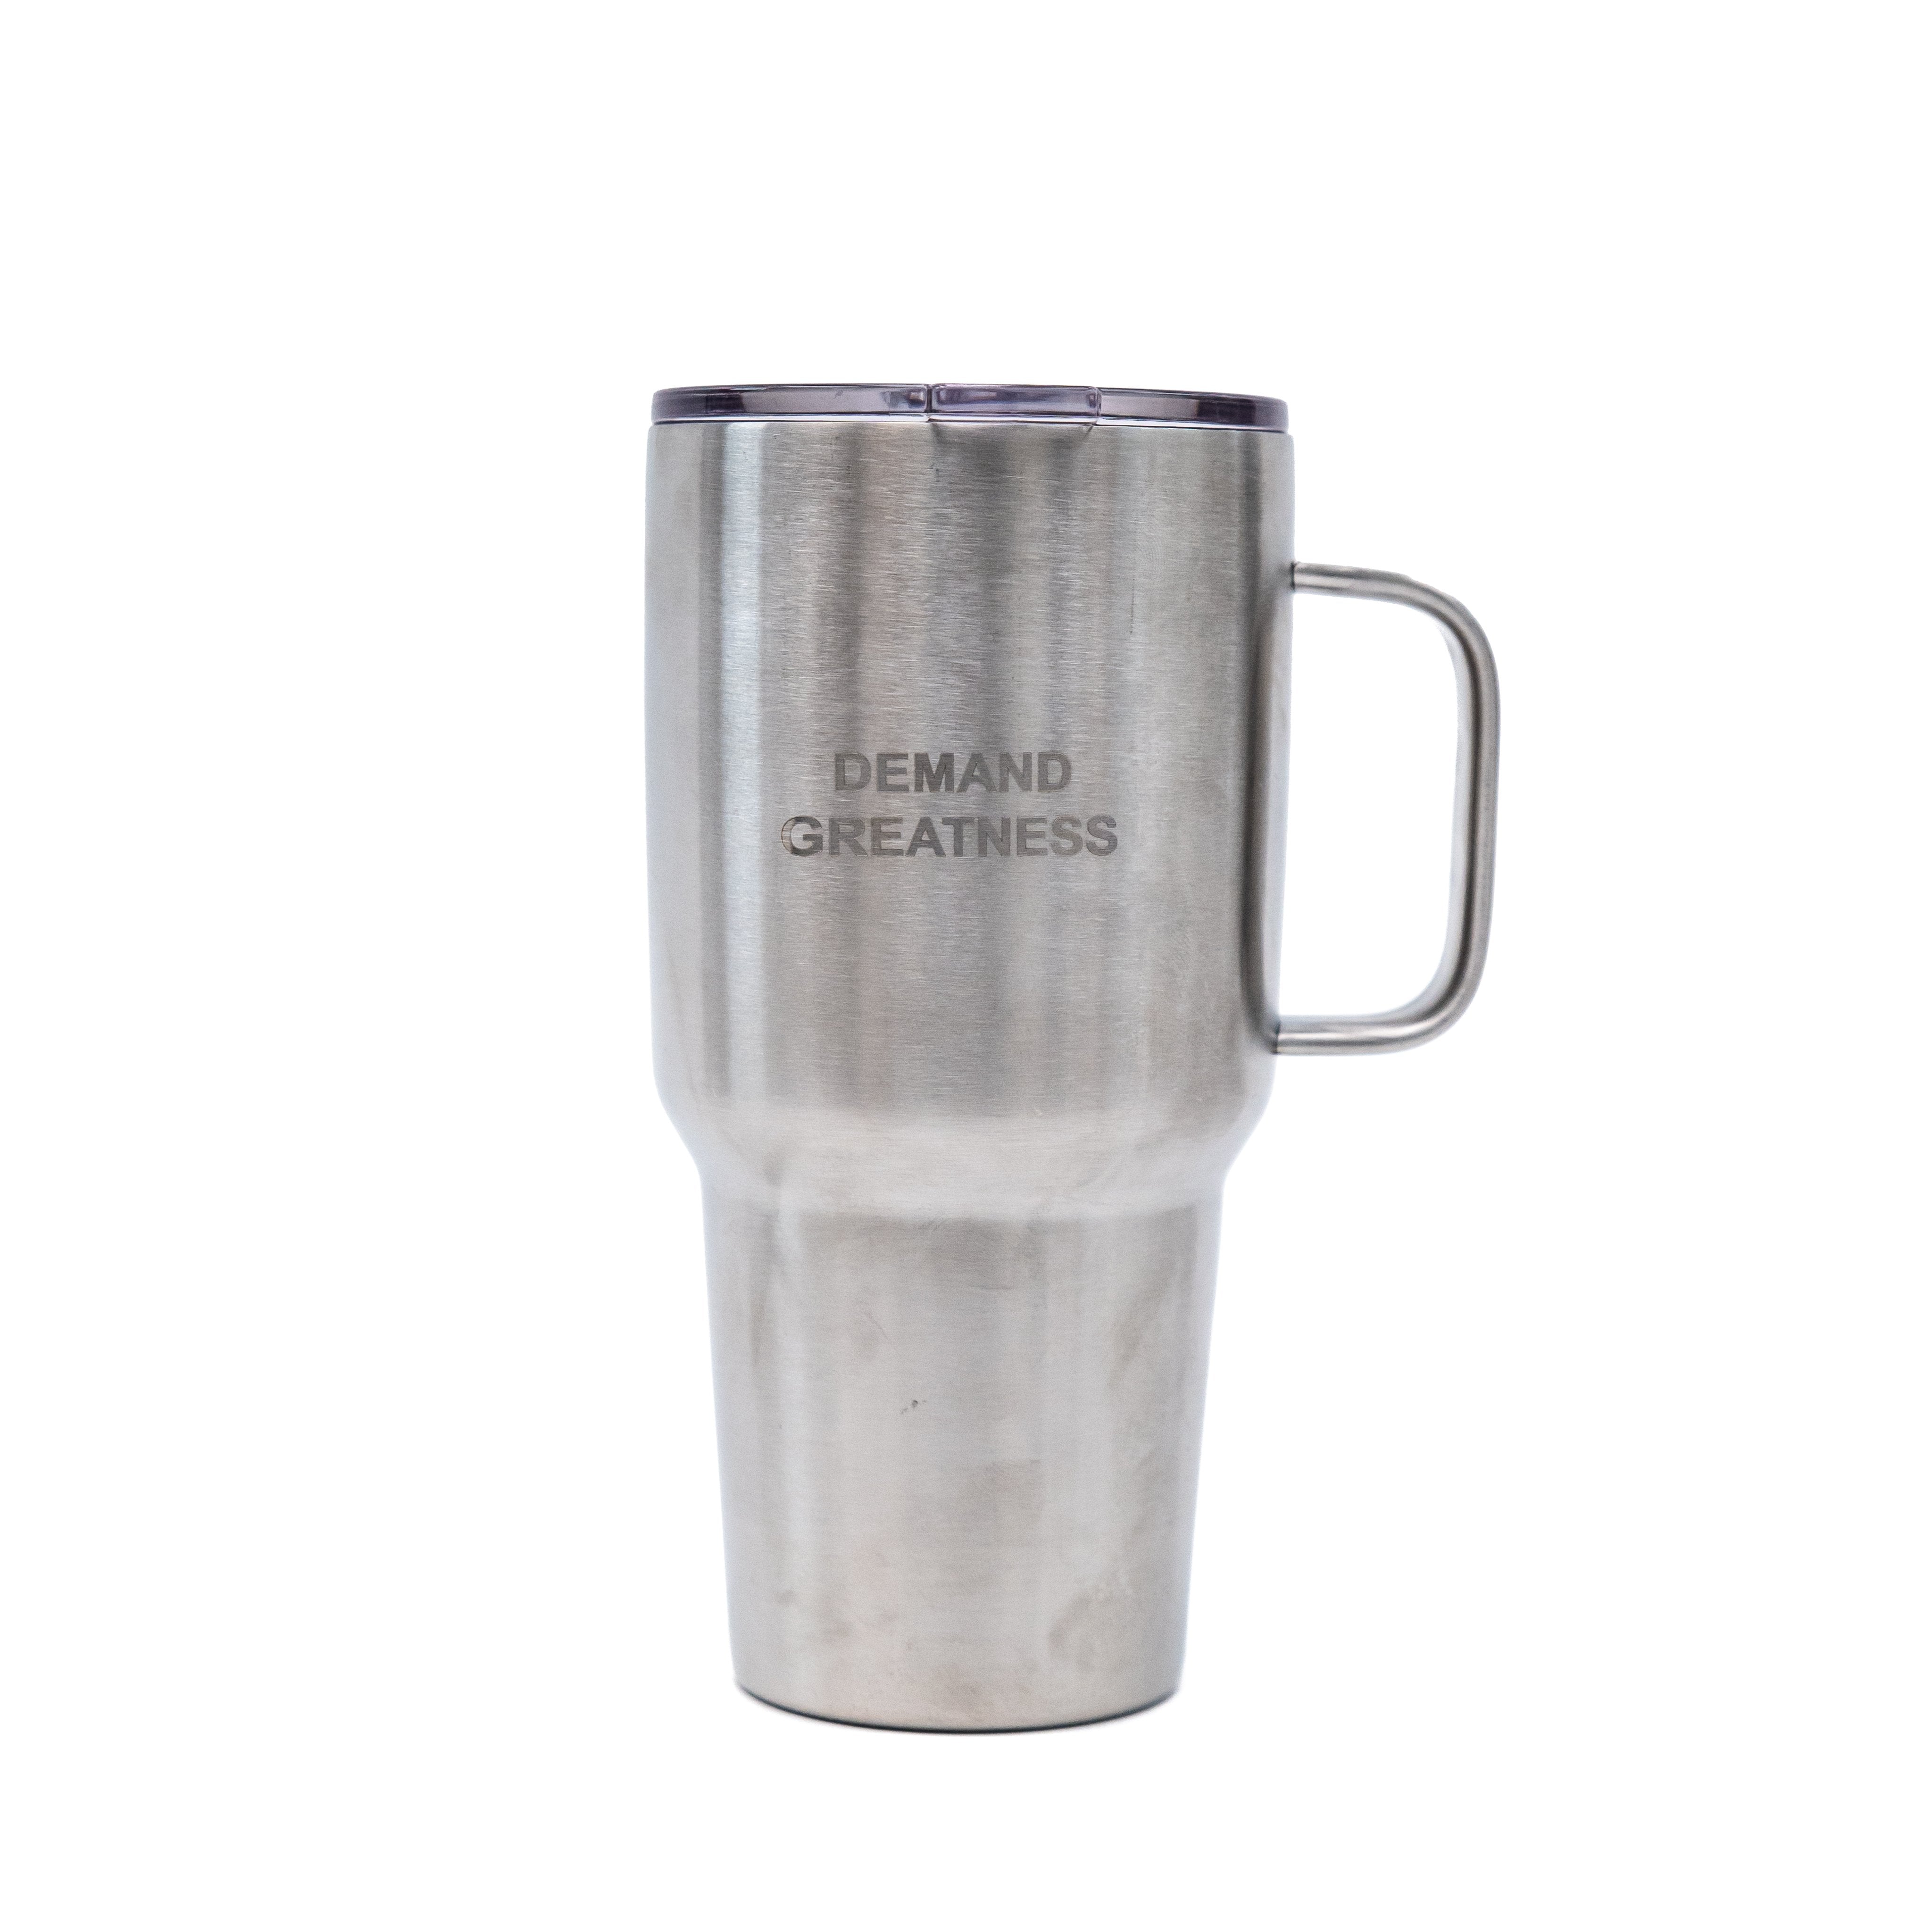 Whether you choose hot or cold beverages our double-wall insulated seamless stainless steel coffee mug is designed to keep your beverages at temperature for longer periods and includes a sliding lid to keep your beverage contained until you are ready for your next sip